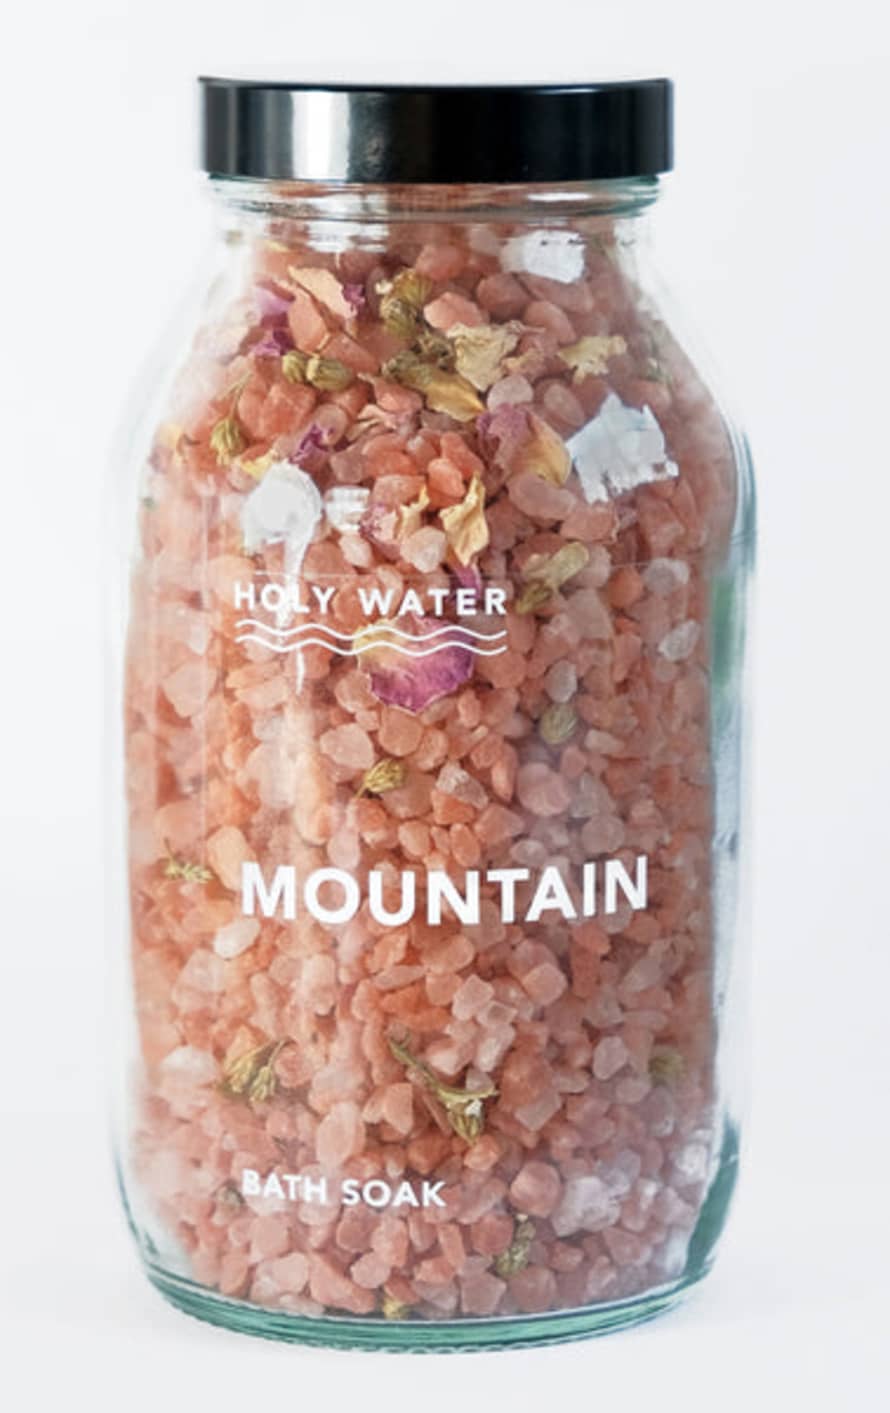 Holy Water Apothecary 500g Holy Water Mountain Bath Salts